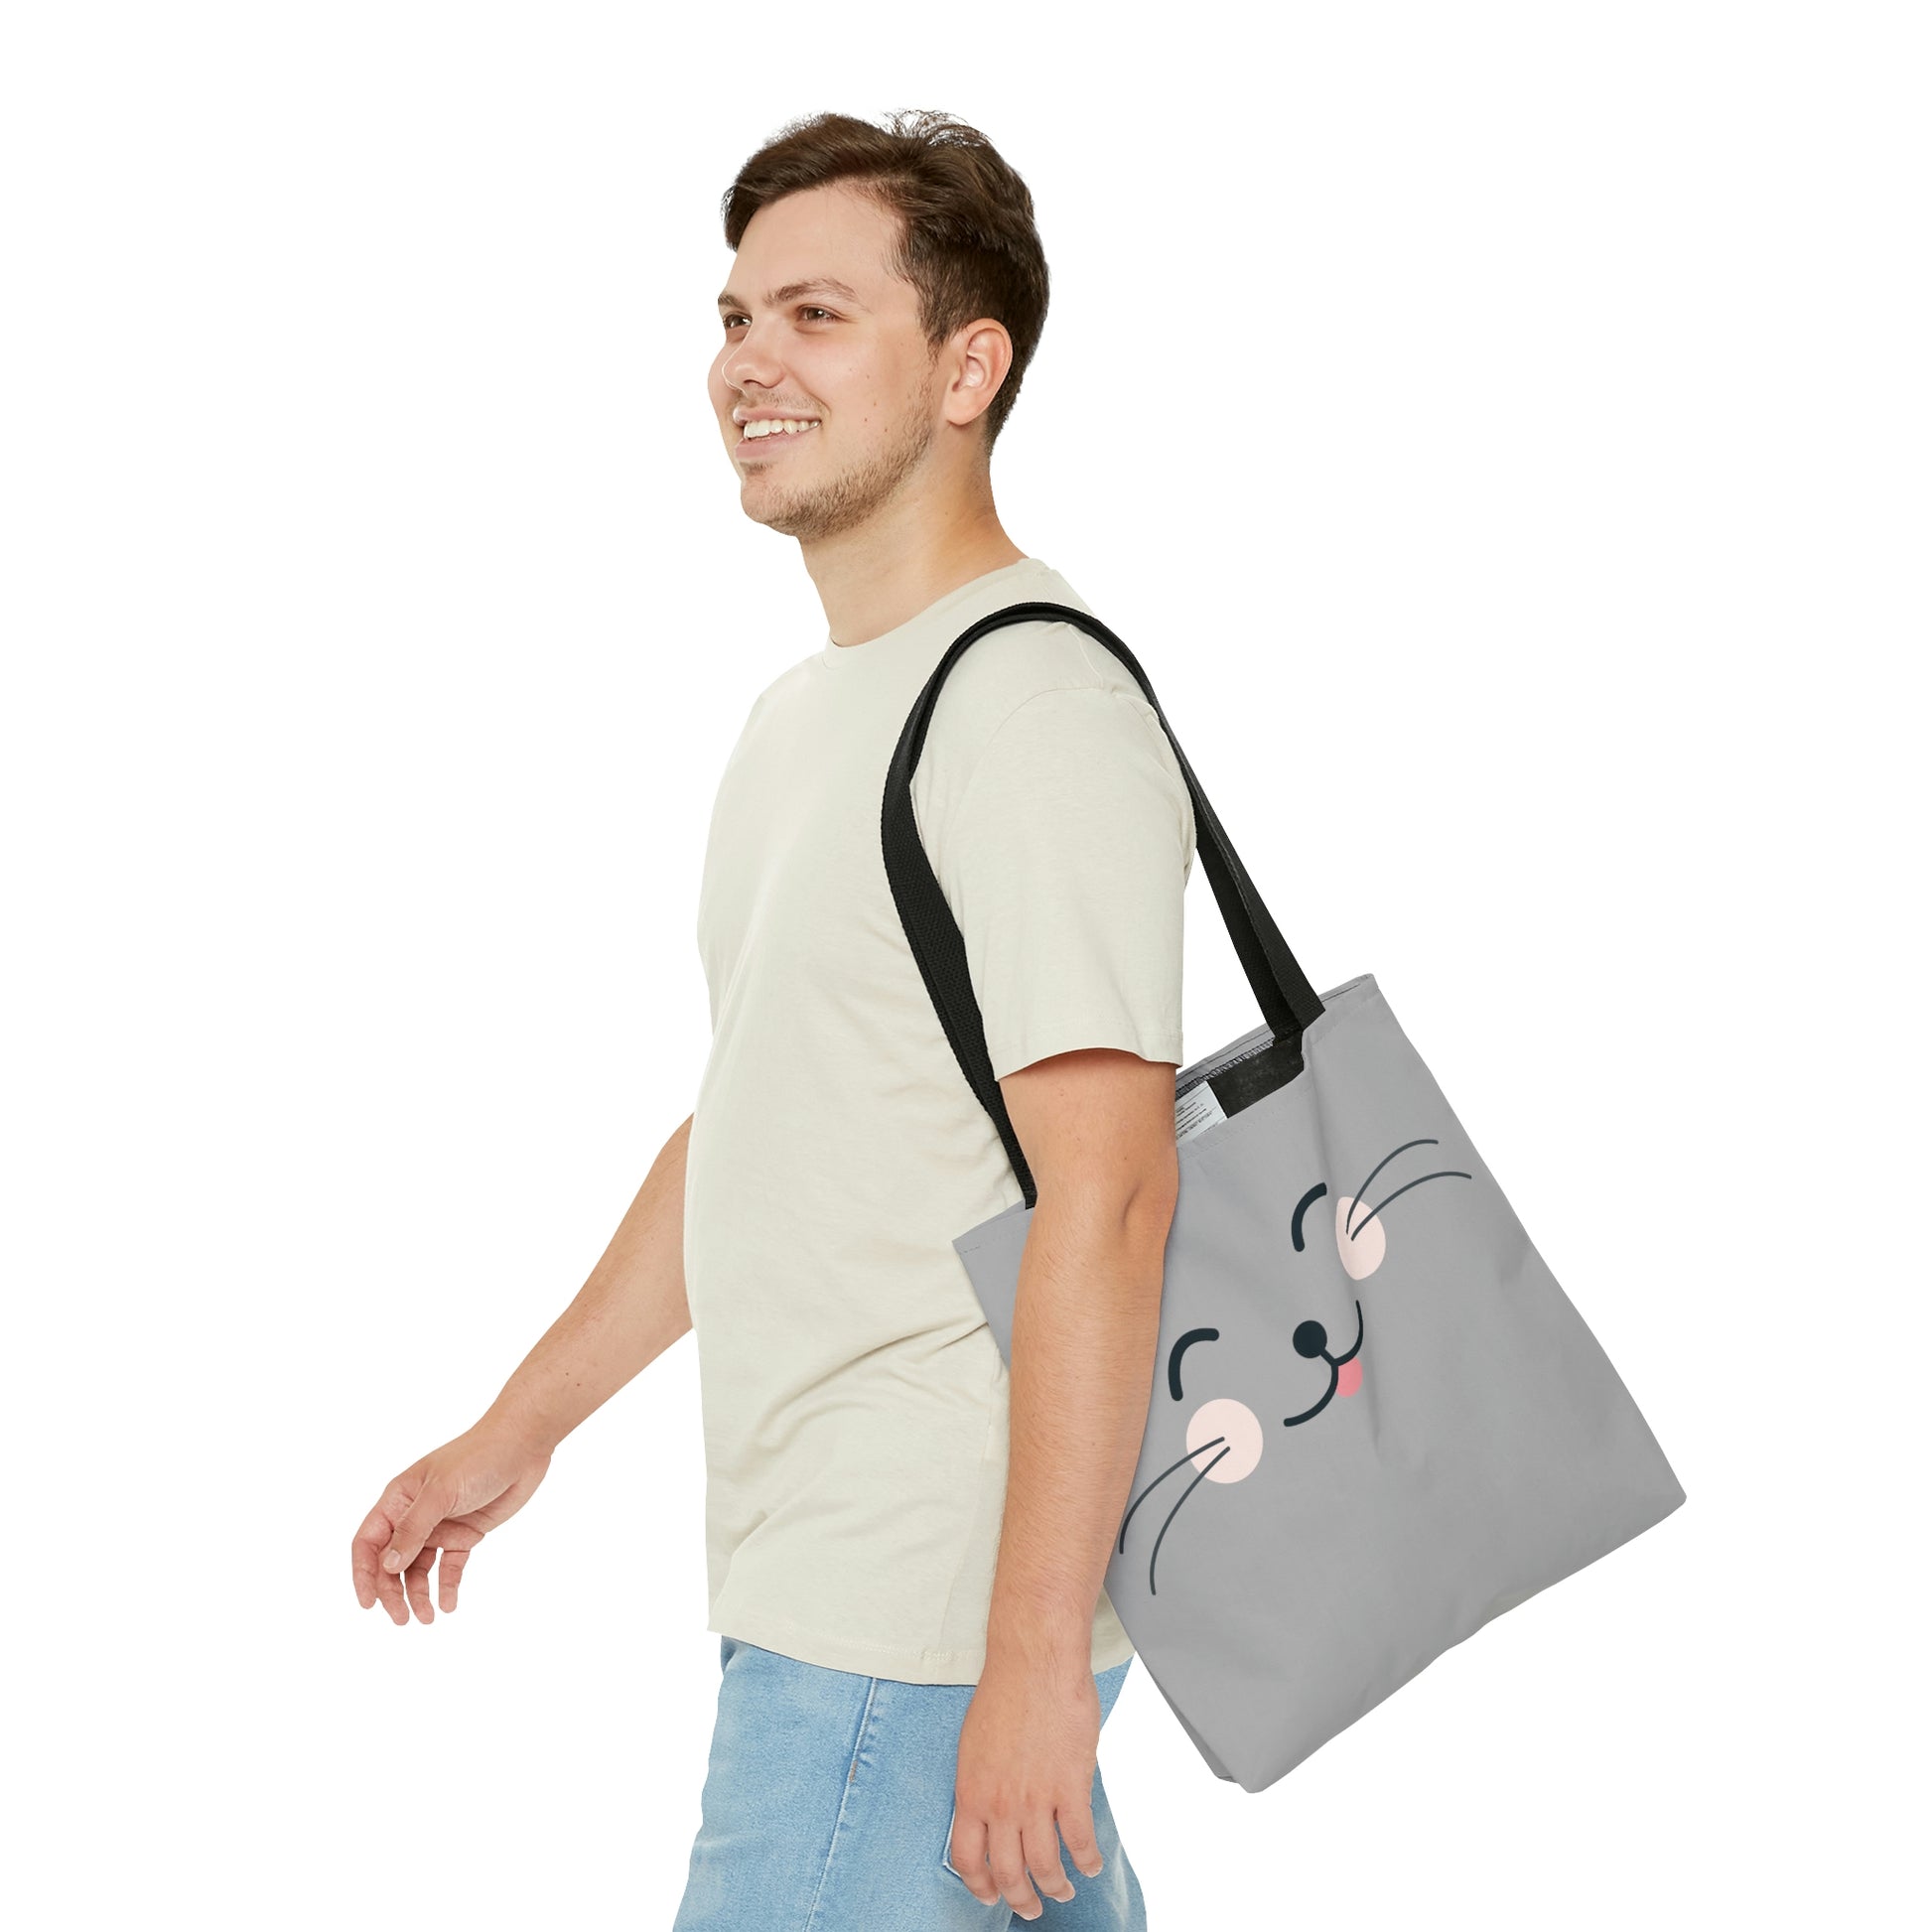 Mock up of the small tote bag being worn on the shoulder of a man